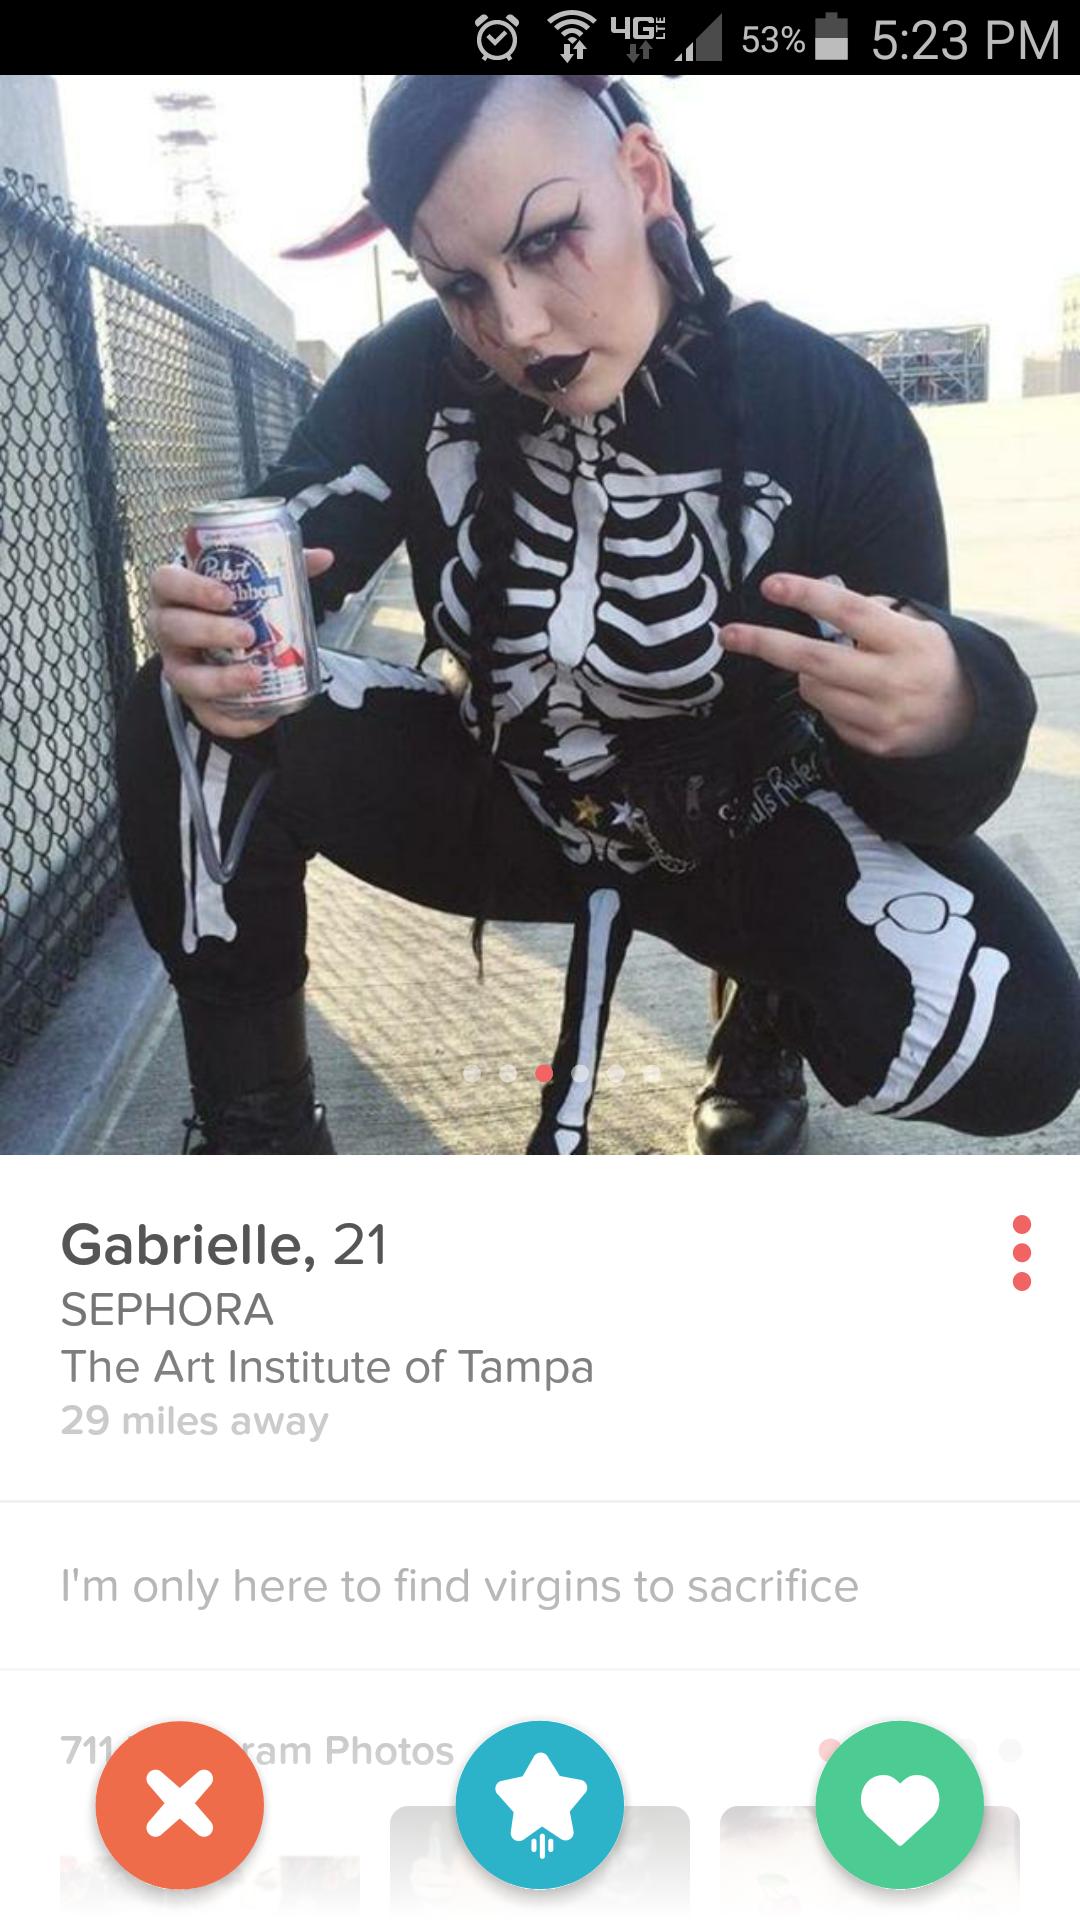 photo caption - 0 46,53% Gabrielle, 21 Sephora The Art Institute of Tampa 29 miles away I'm only here to find virgins to sacrifice ram Photos Oo X